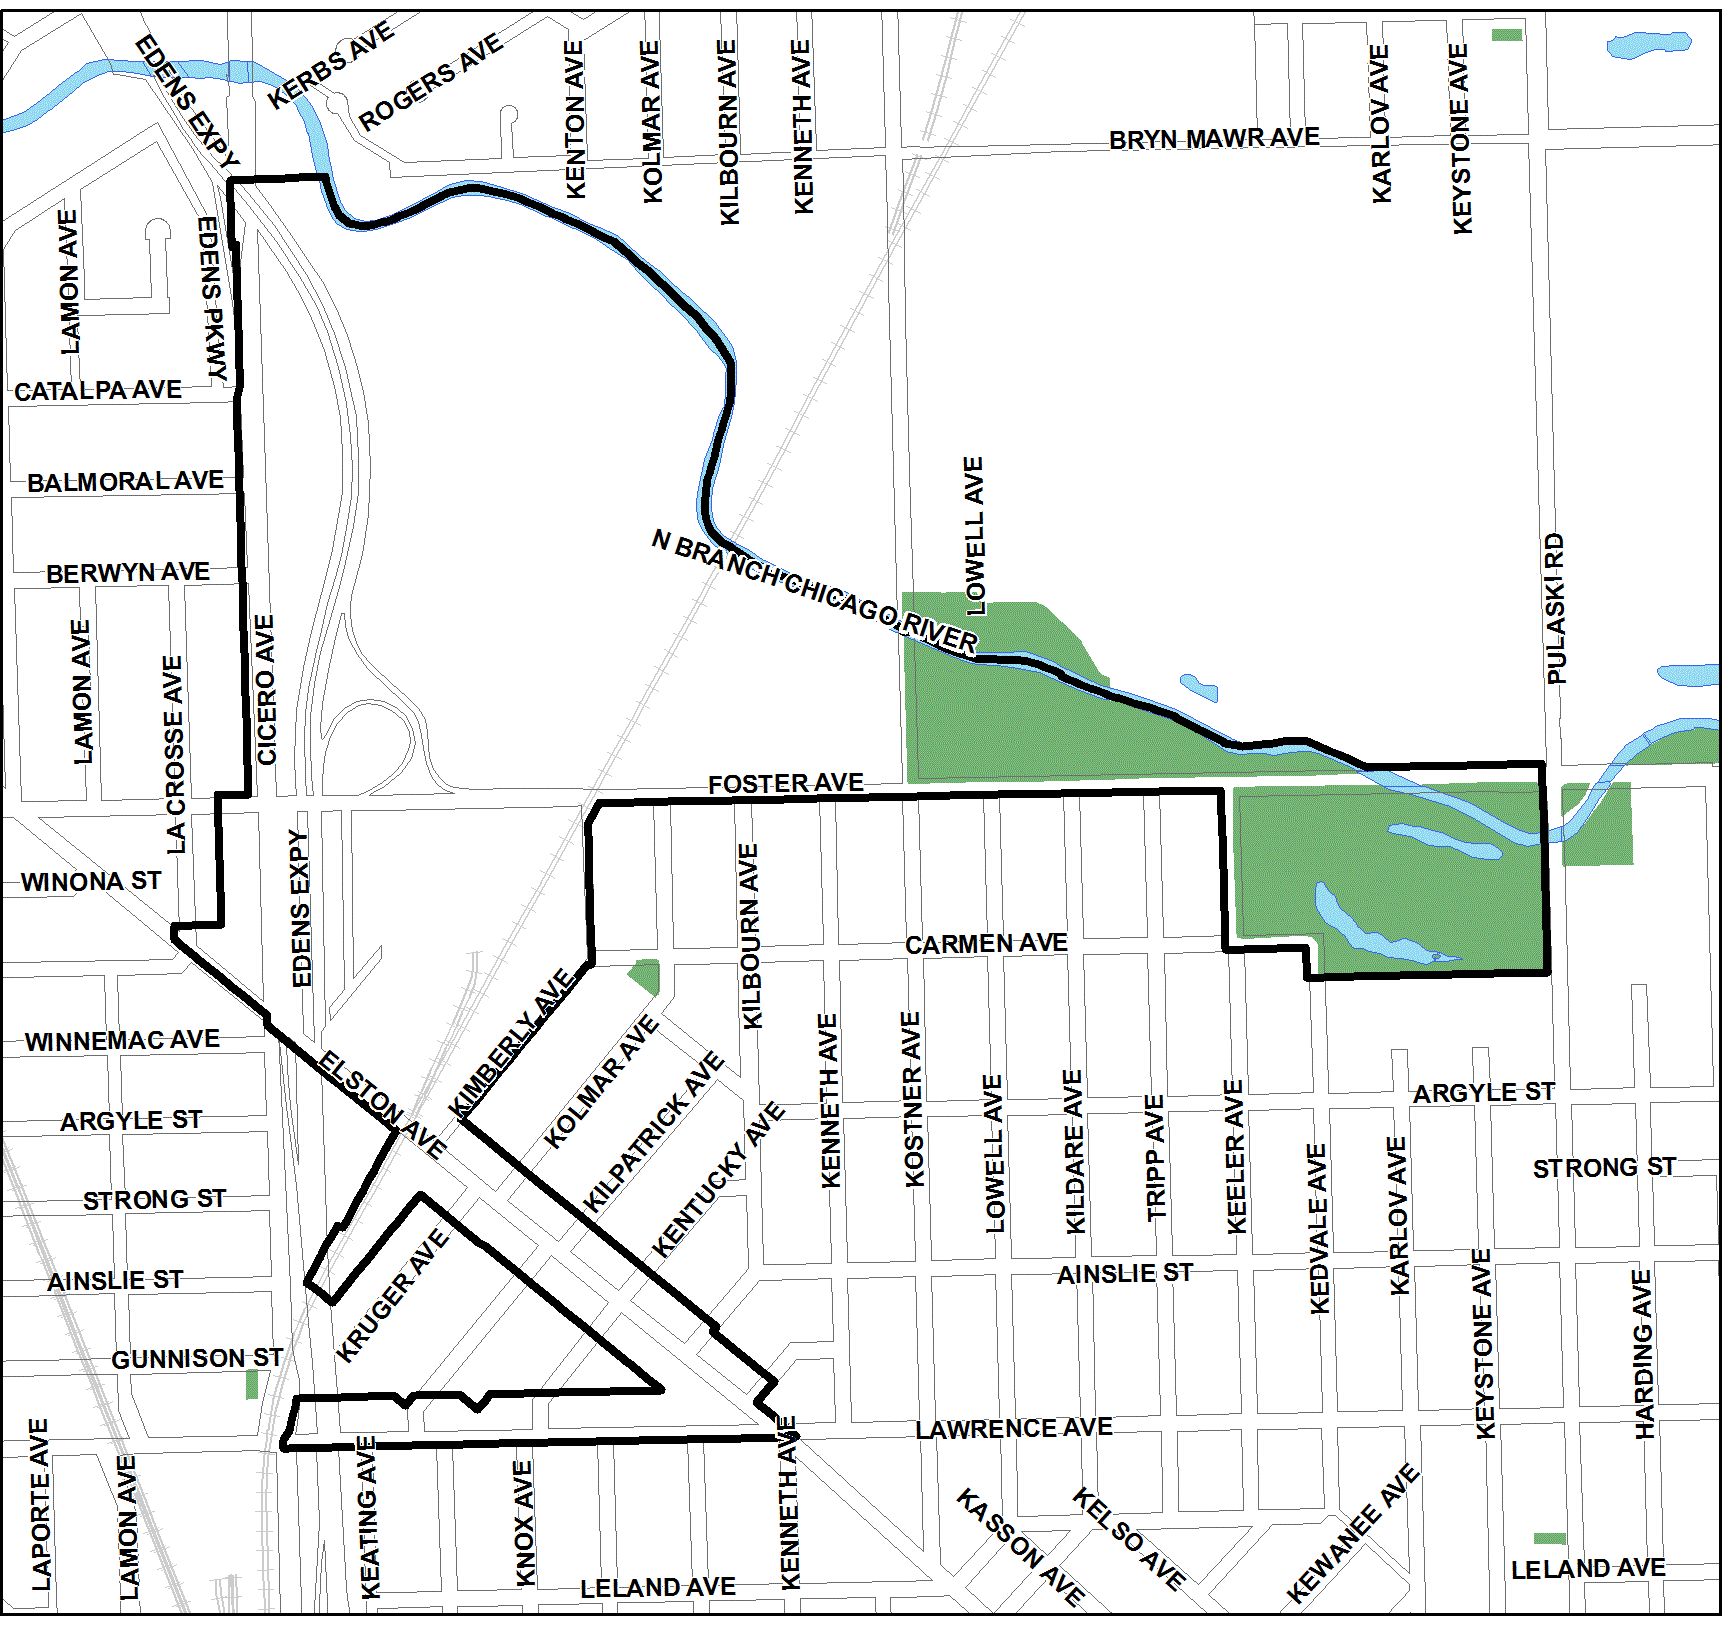 Foster/Edens TIF district, roughly bounded on the north by the North Branch Chicago River, Pulaski Road on the east, Lawrence and Foster avenues on the south, and Cicero Avenue on the west.